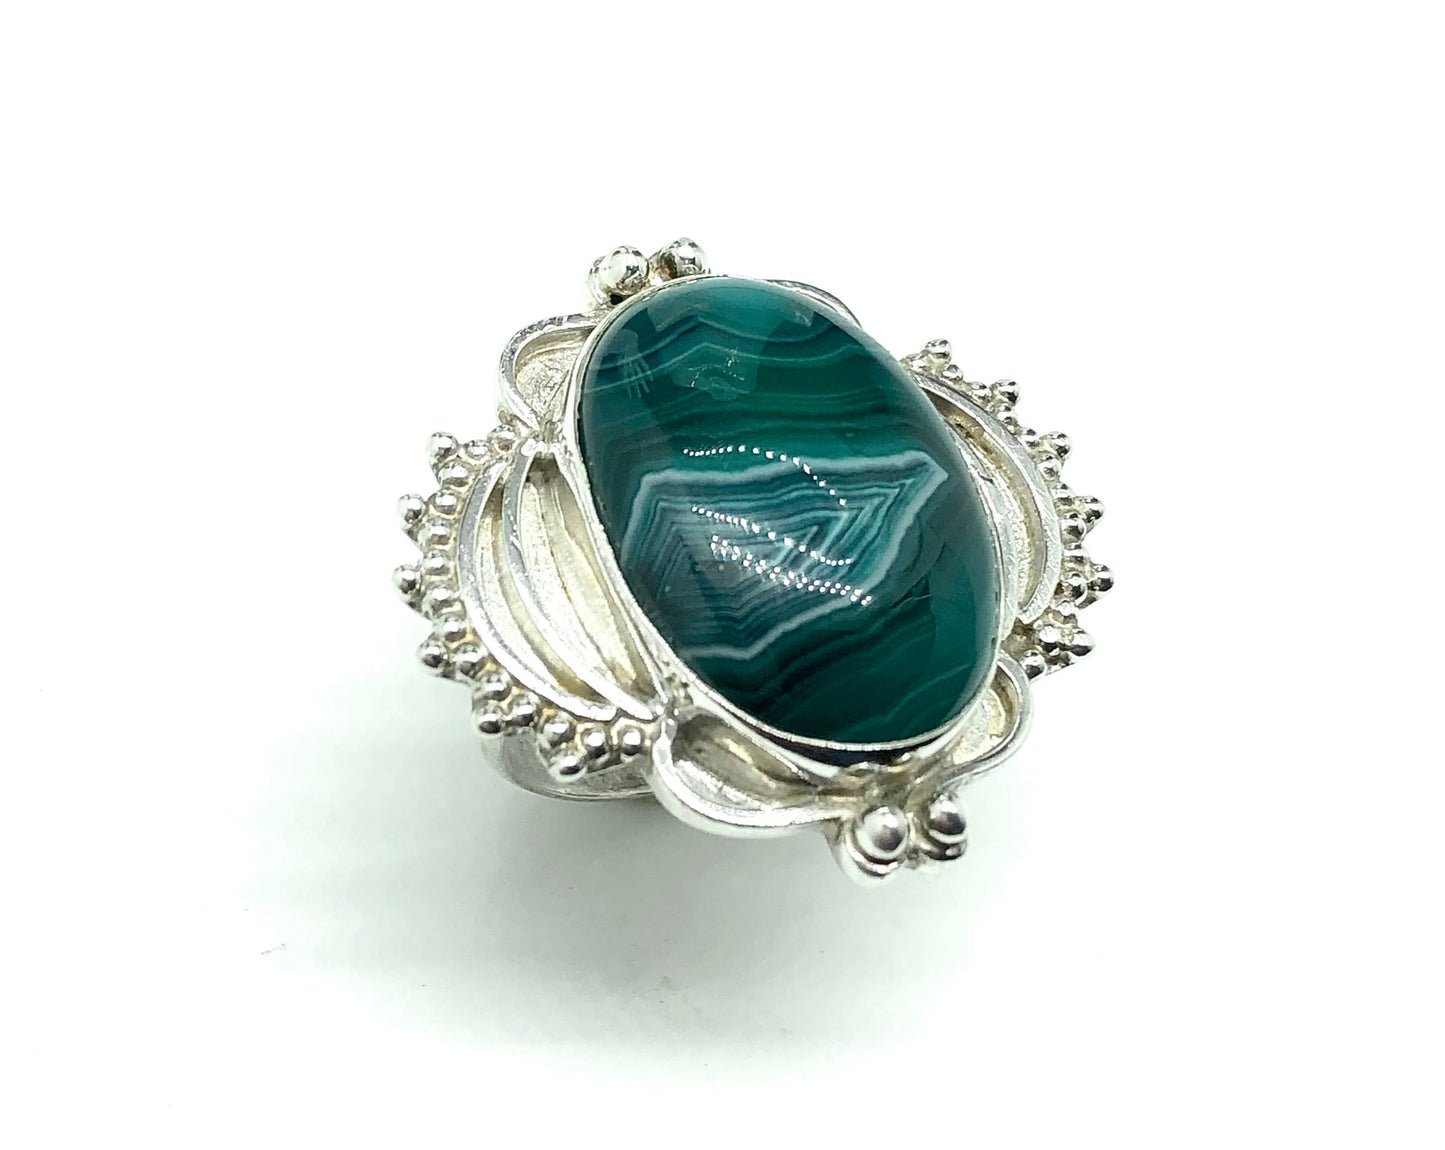 Big Ring, Sterling Silver Teal Green Bold Banded Agate Stone Statement Ring - Blingschlingers Jewelry